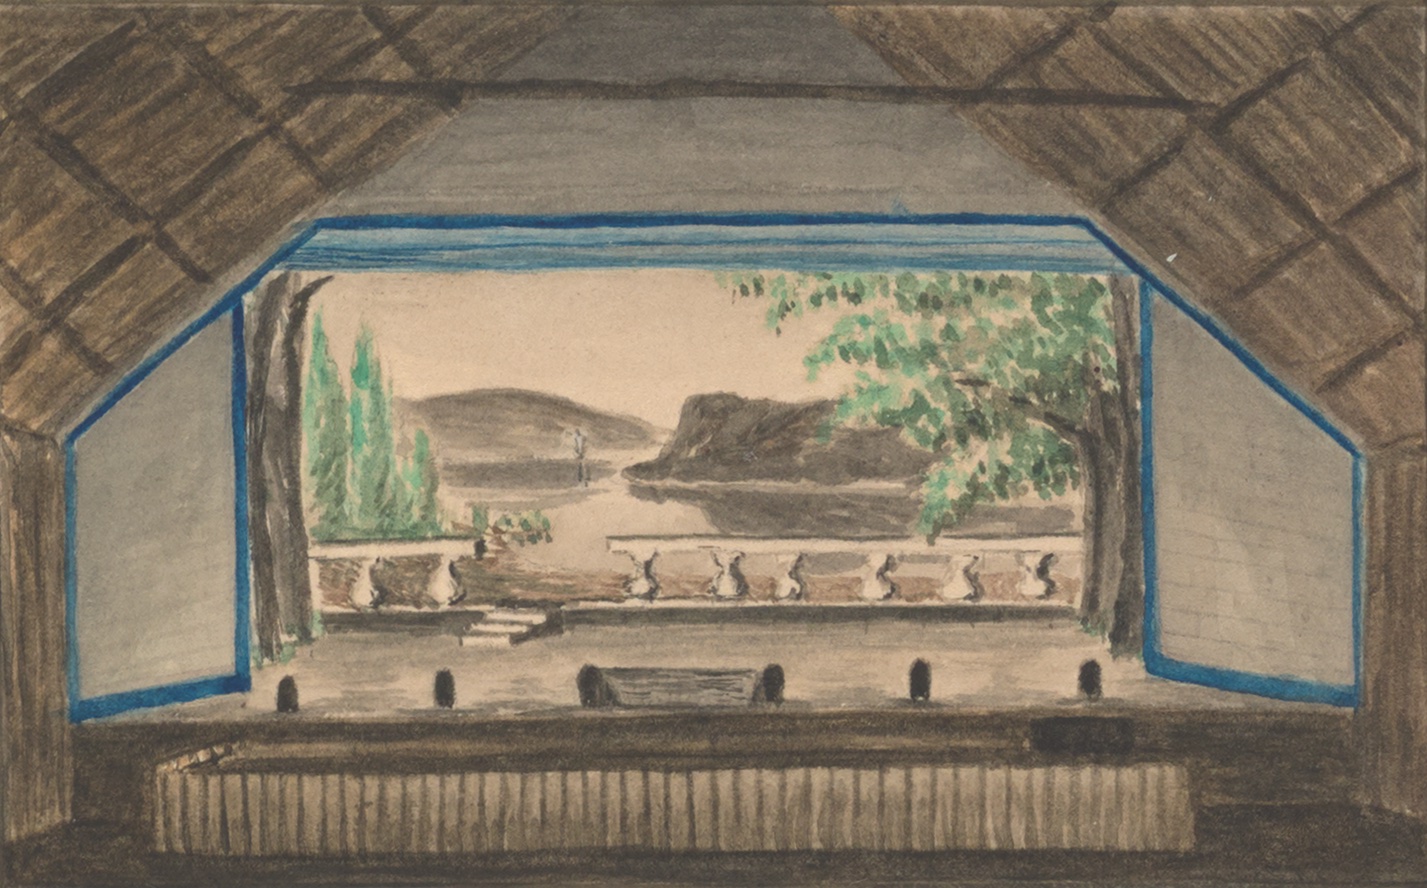 “Interior of the Essayons Theater.” This watercolor depicts the interior of the Essayons Theater that members of the U.S. Engineer Battalion built for their own recreation while in winter quarters in early 1864. Thompson painted the West Point inspired landscape backdrop, and was pleased that it was “standing out finely.” (Library of Congress)